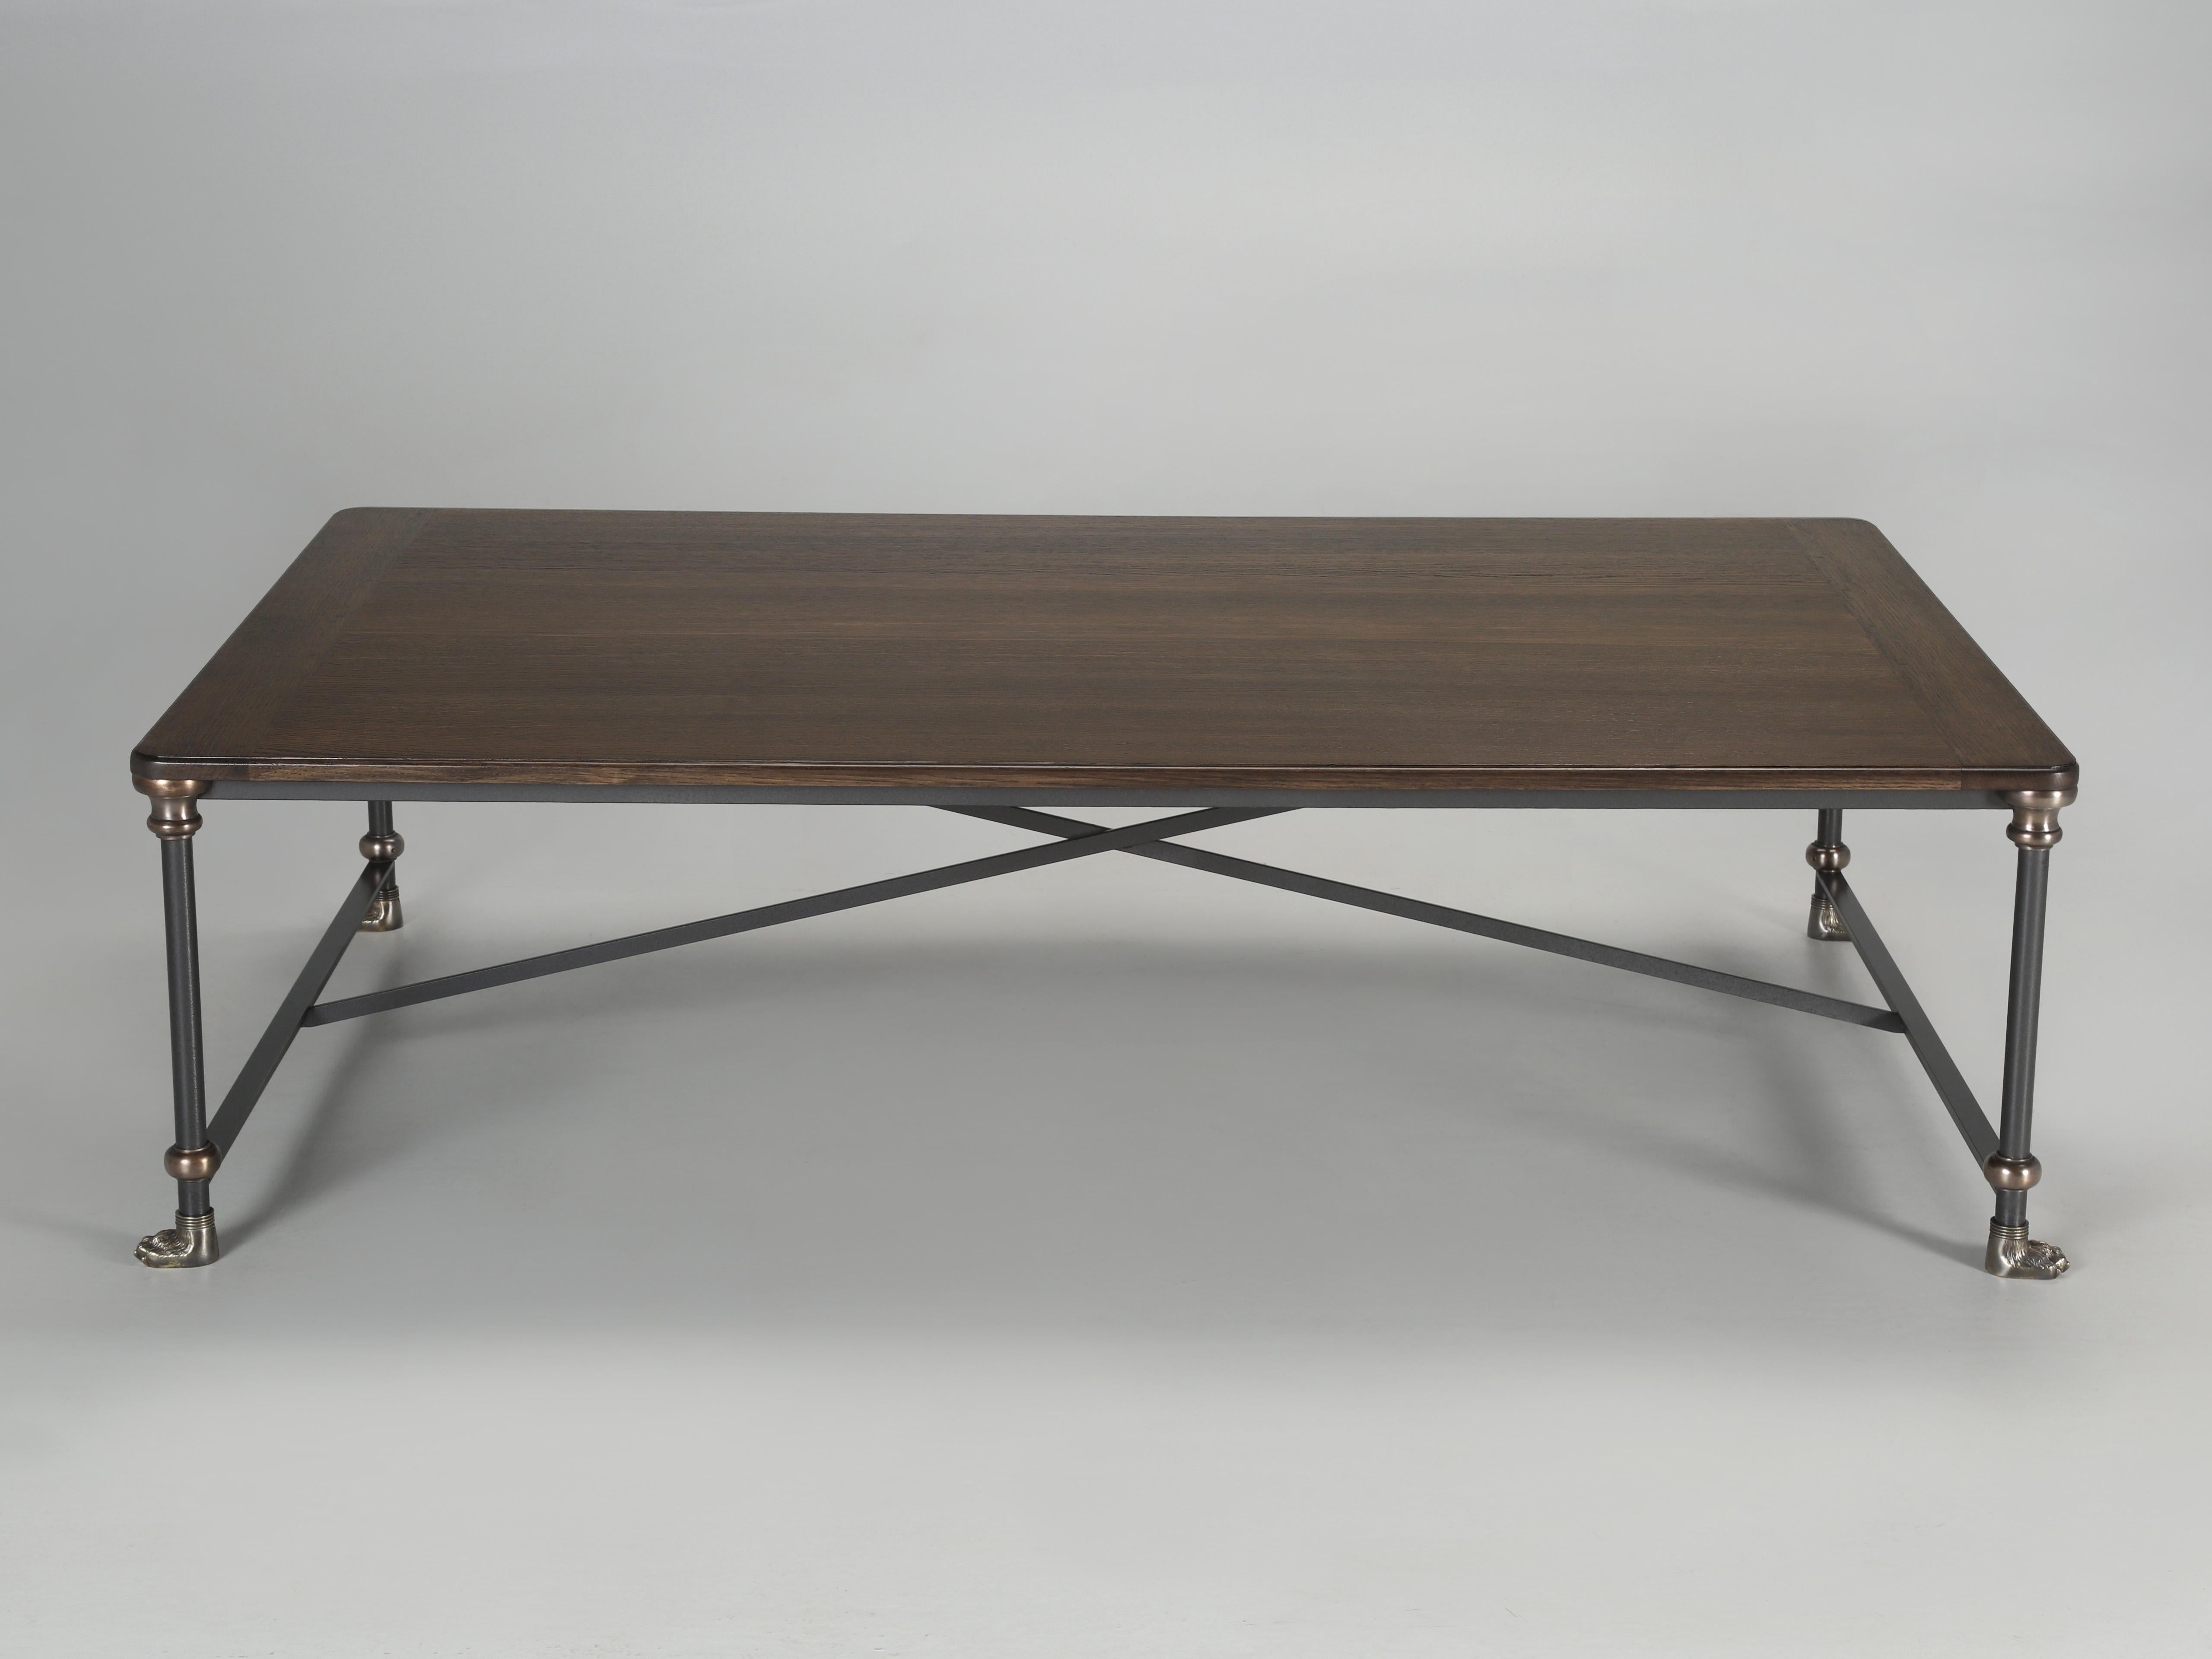 Coffee table hand-made in Chicago to your specifications and virtually any dimension or finish is possible. Our Industrial style coffee table is made with a rift-cut white oak top with bread-board ends, steel hammertone finished frame, solid bronze